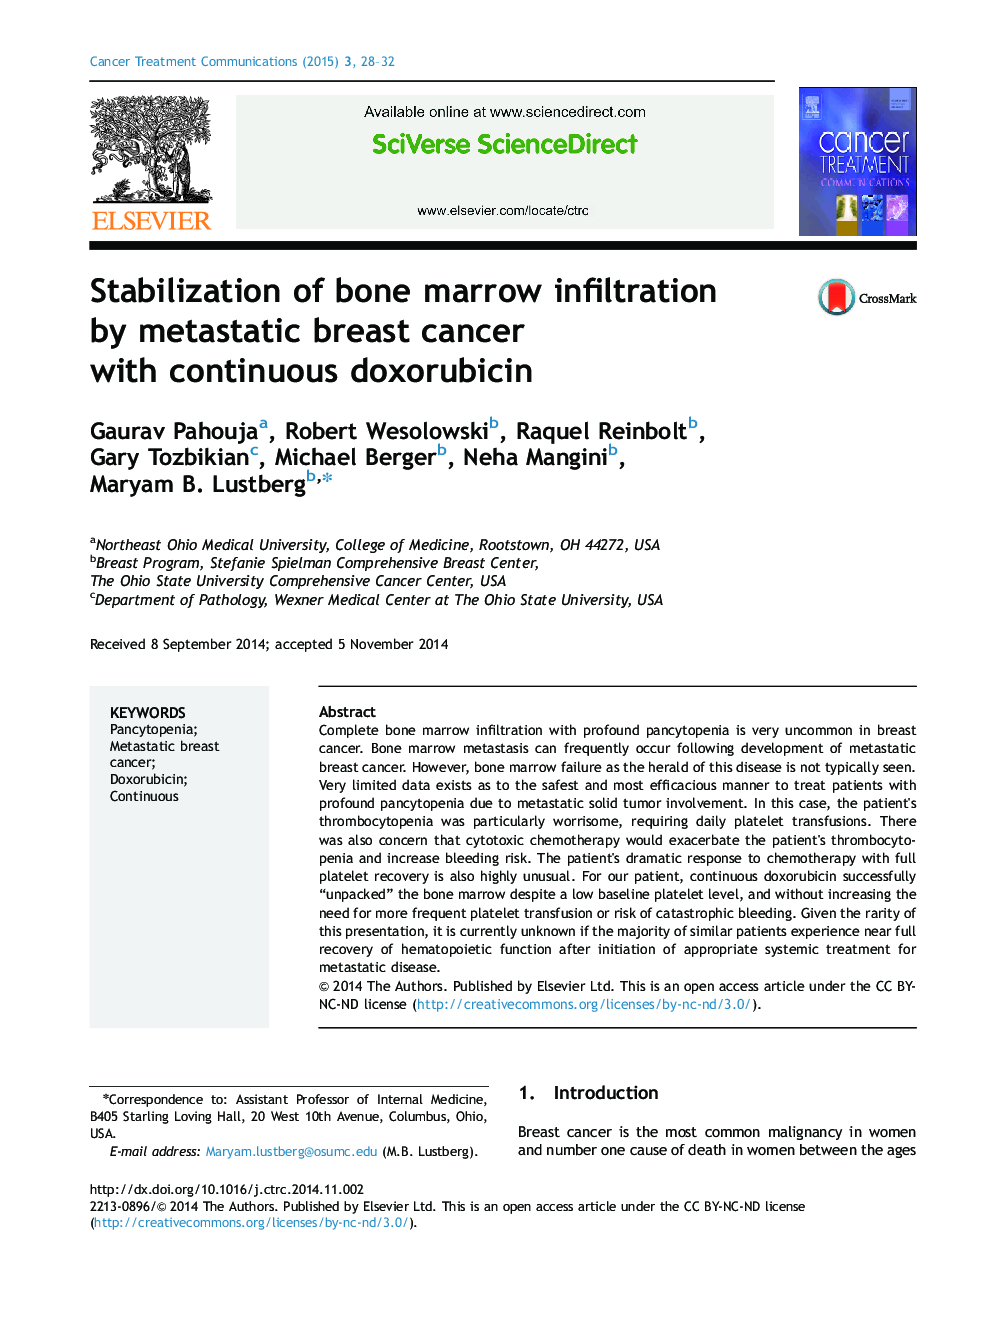 Stabilization of bone marrow infiltration by metastatic breast cancer with continuous doxorubicin